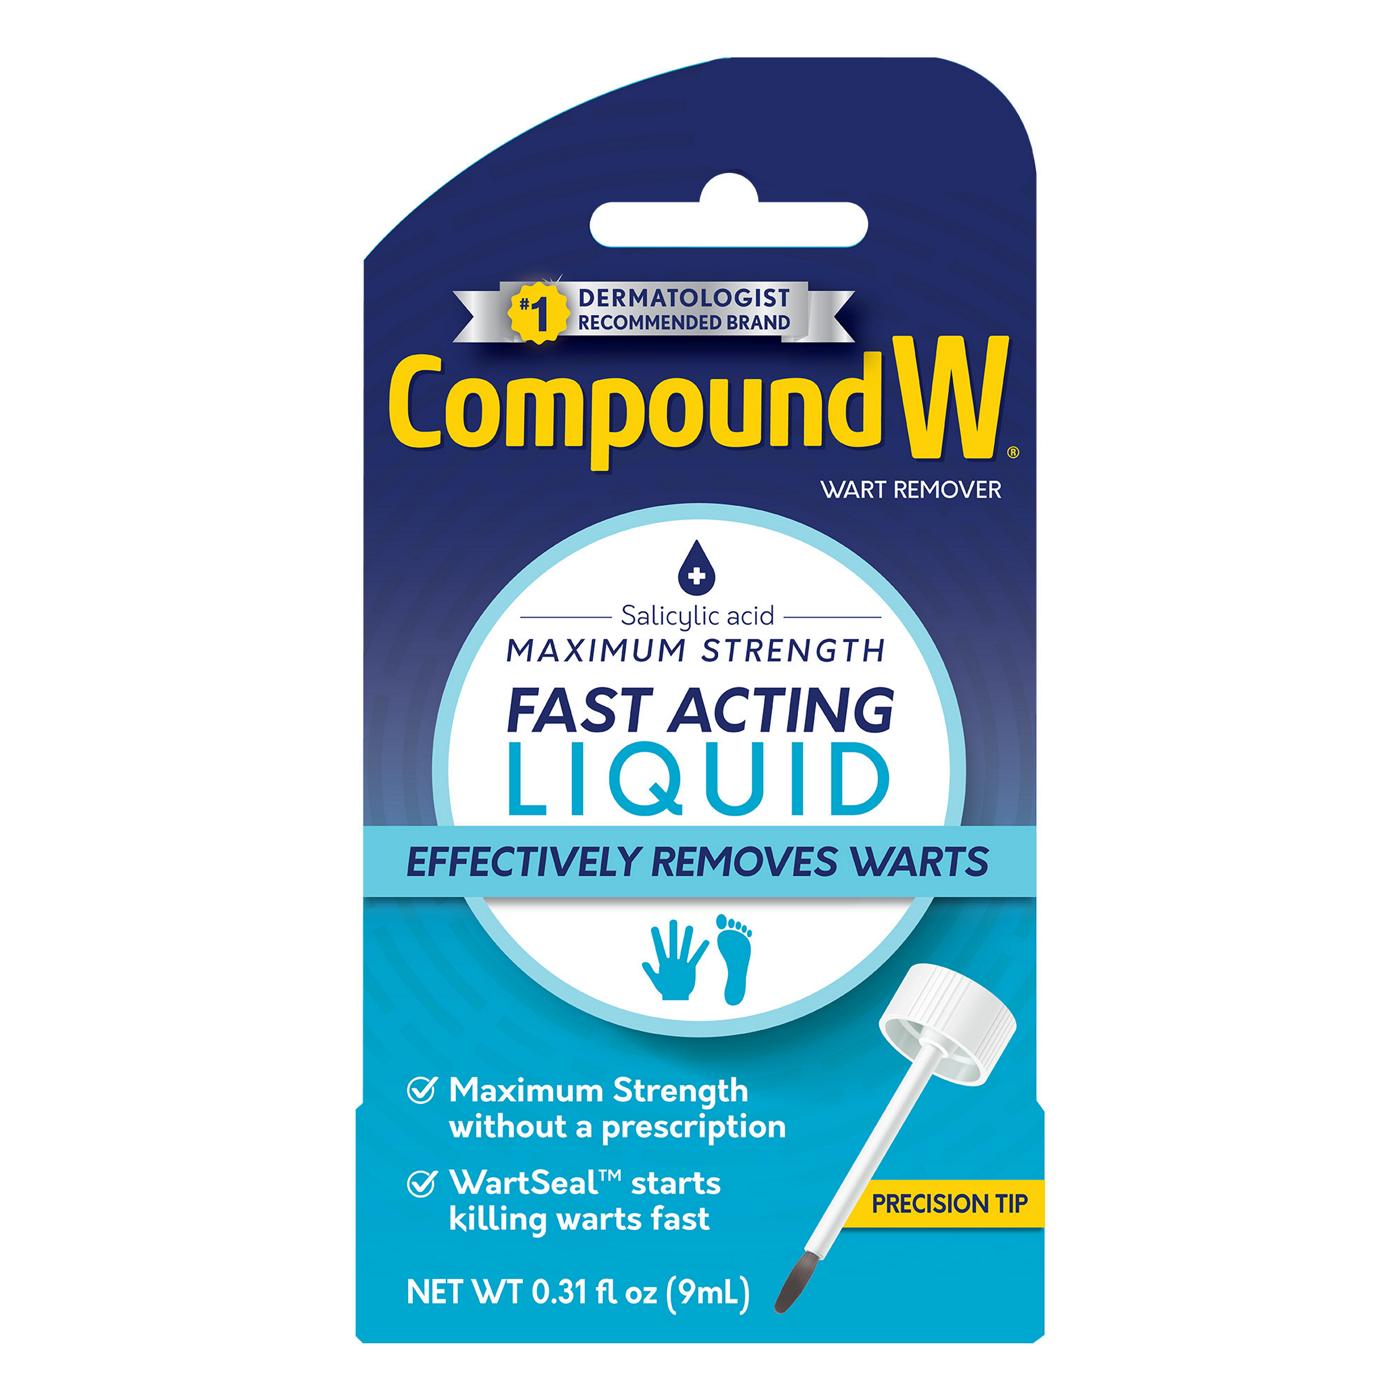 Compound W Maximum Strength Fast Acting Liquid Wart Remover; image 1 of 5